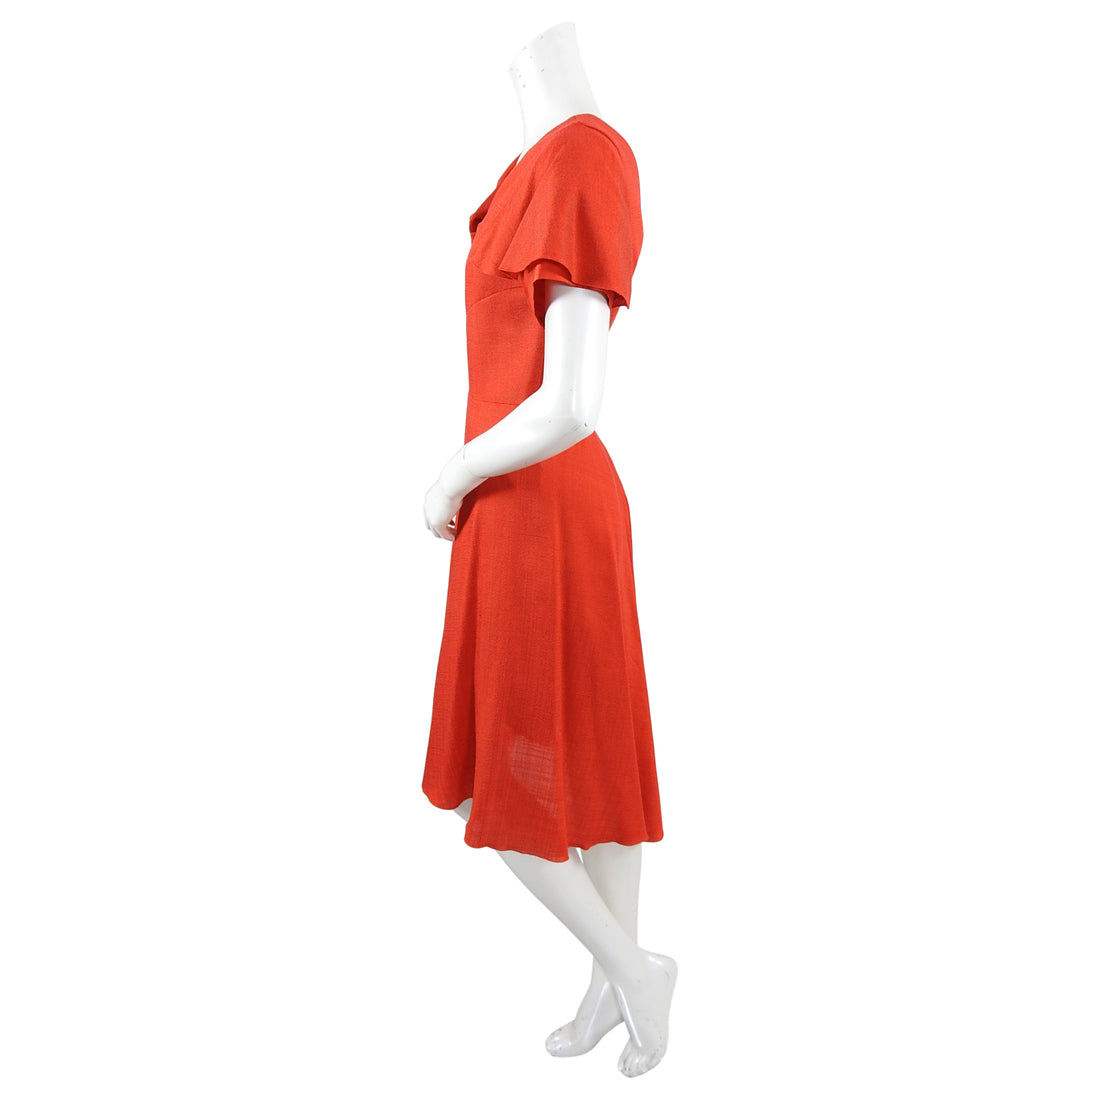 Depozo Spring 2018 Red Linen and Silk Runway Dress - L / 10 / 12